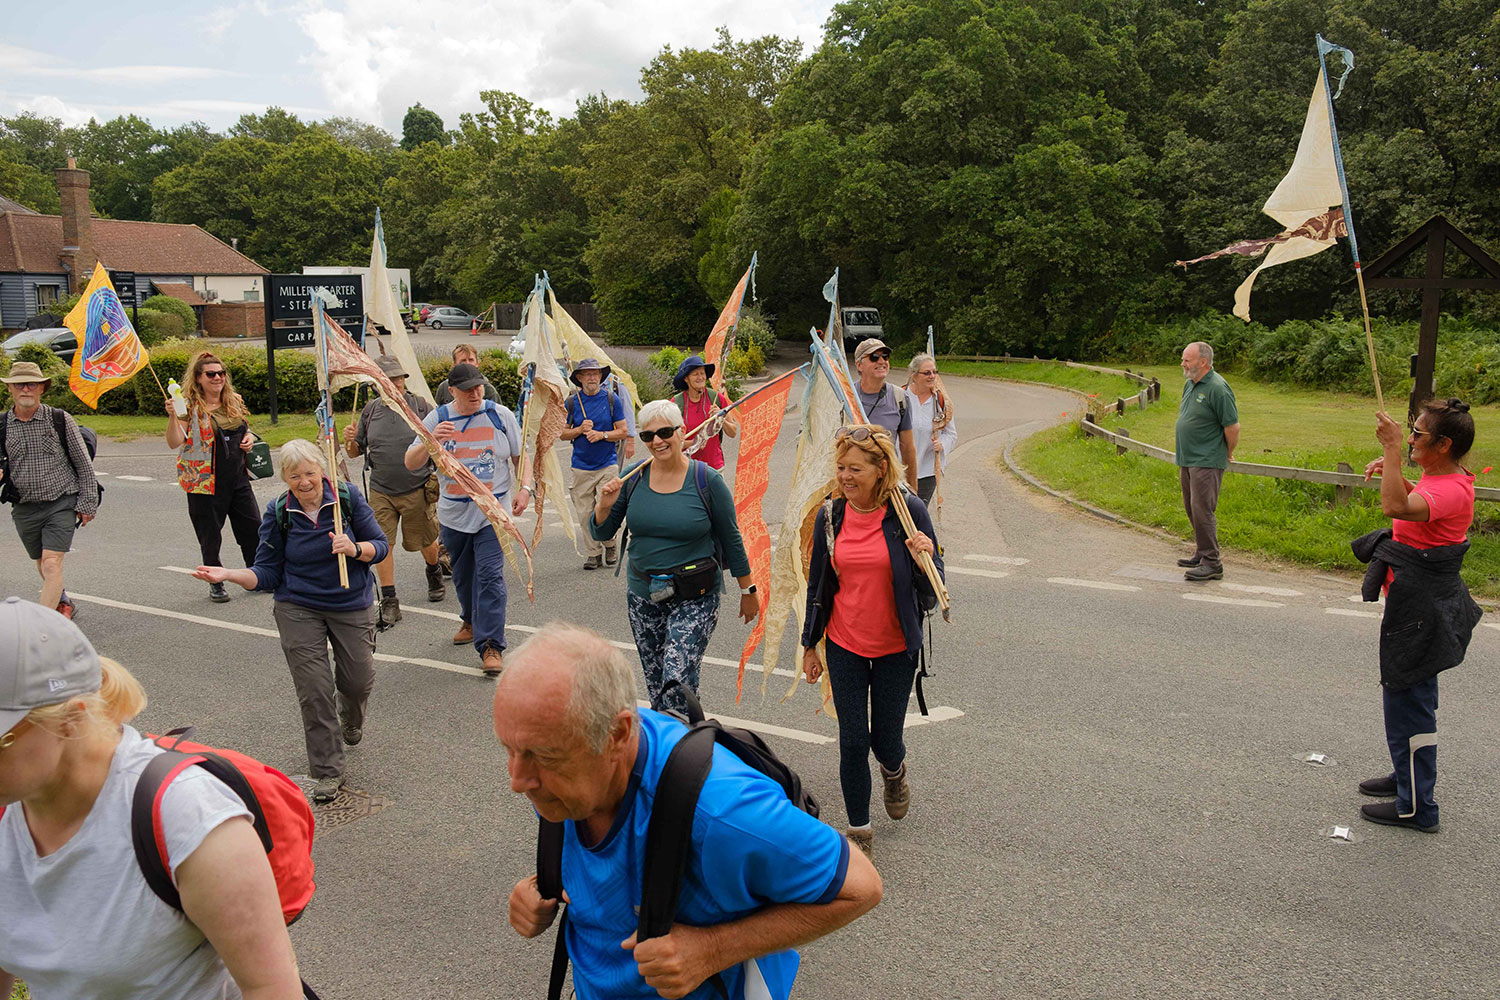 Group of walkers holding silk pennants walk towards the viewer crossing a road